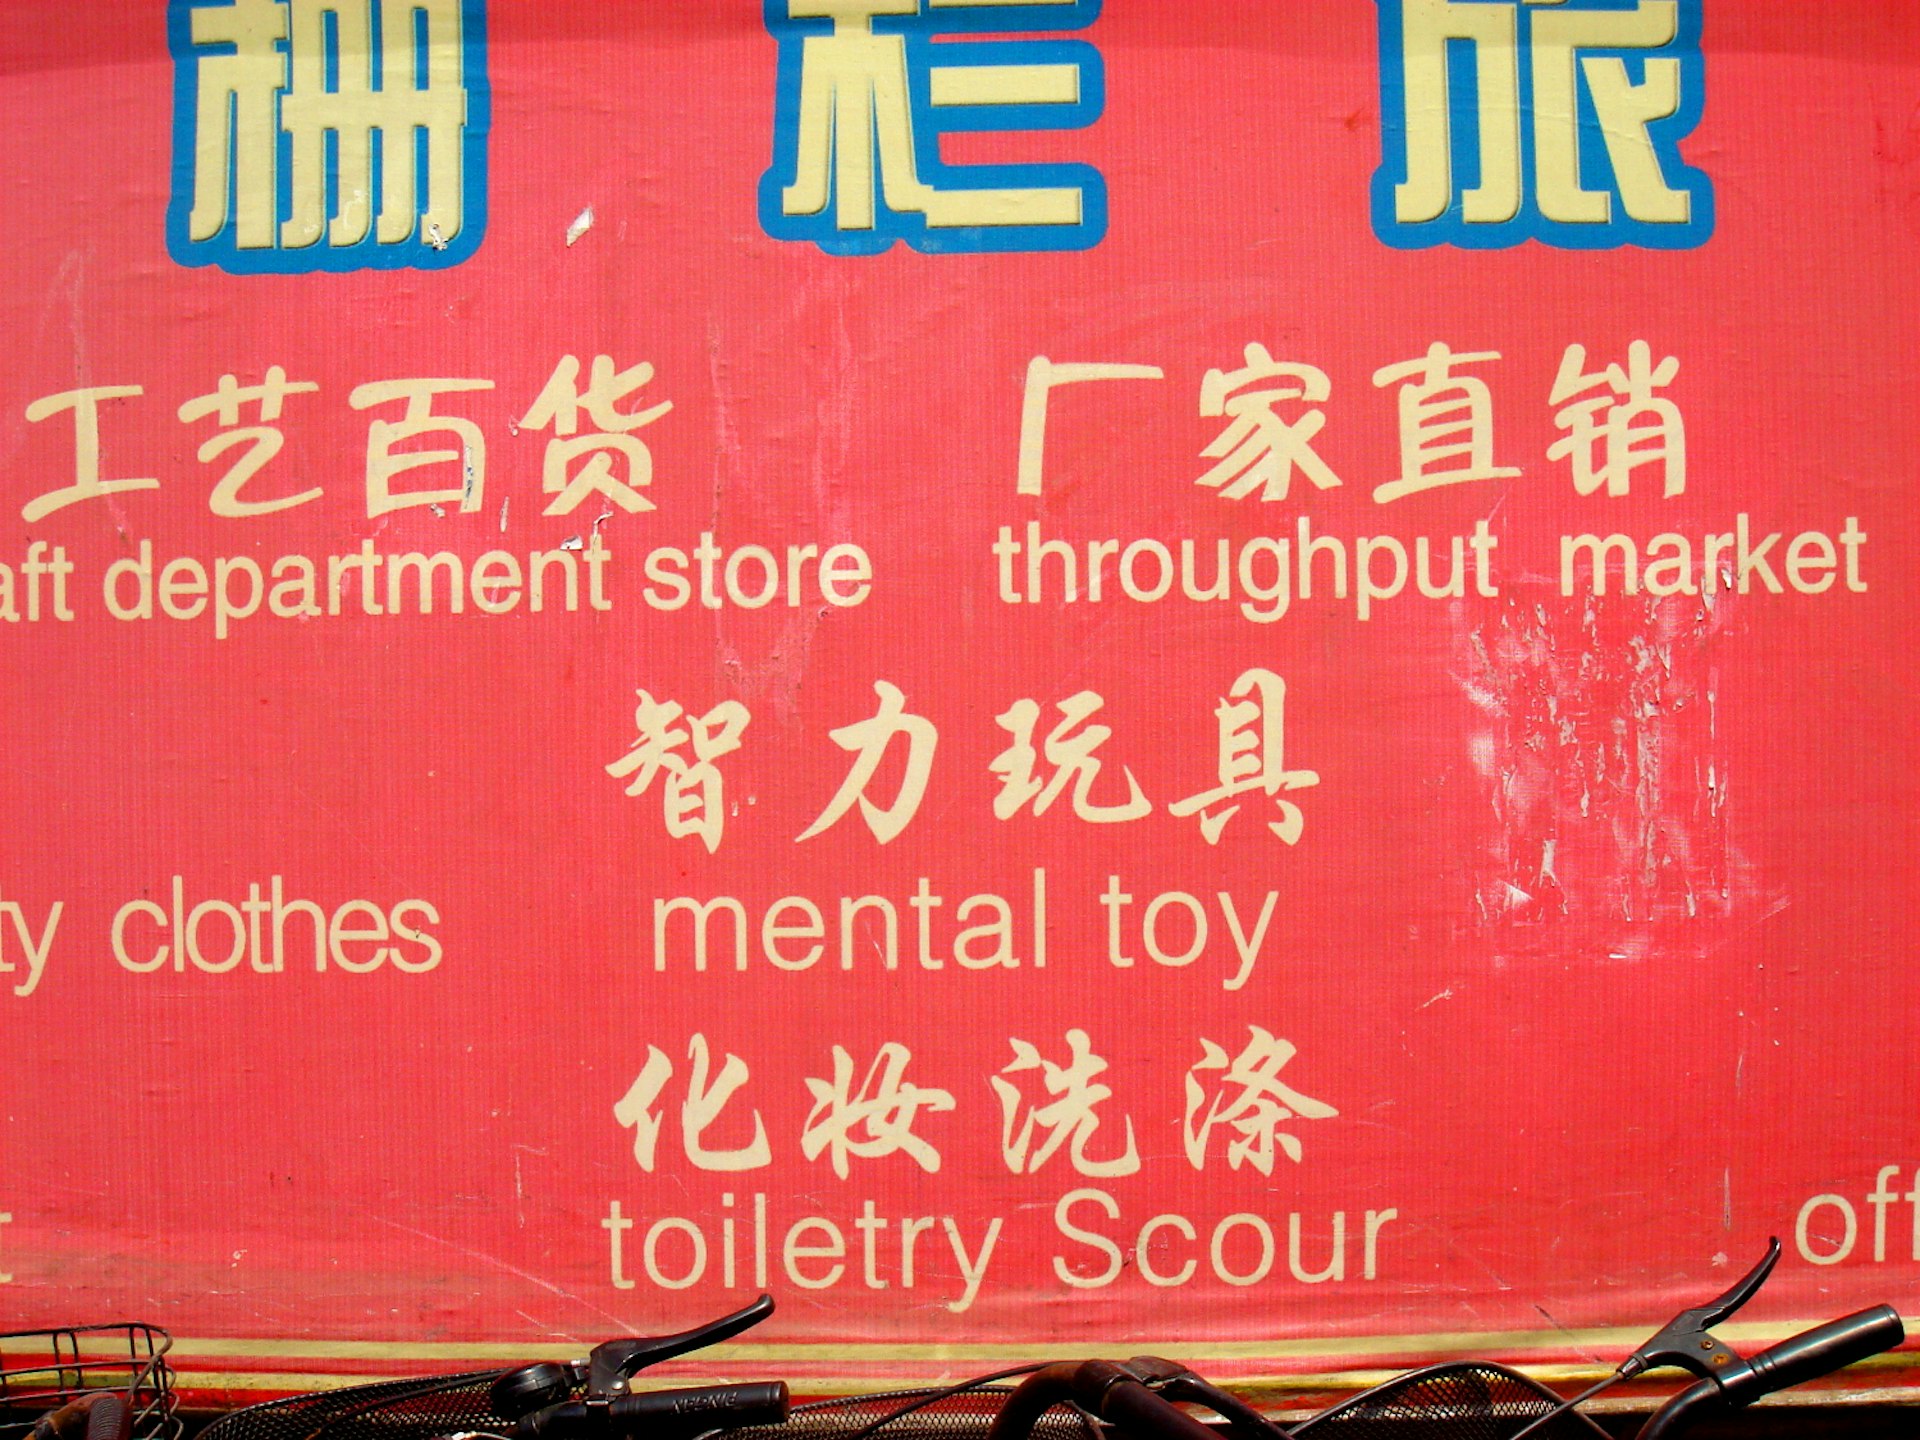 Sometimes things get lost in translation. Image by megoizzy / CC BA-SA 2.0